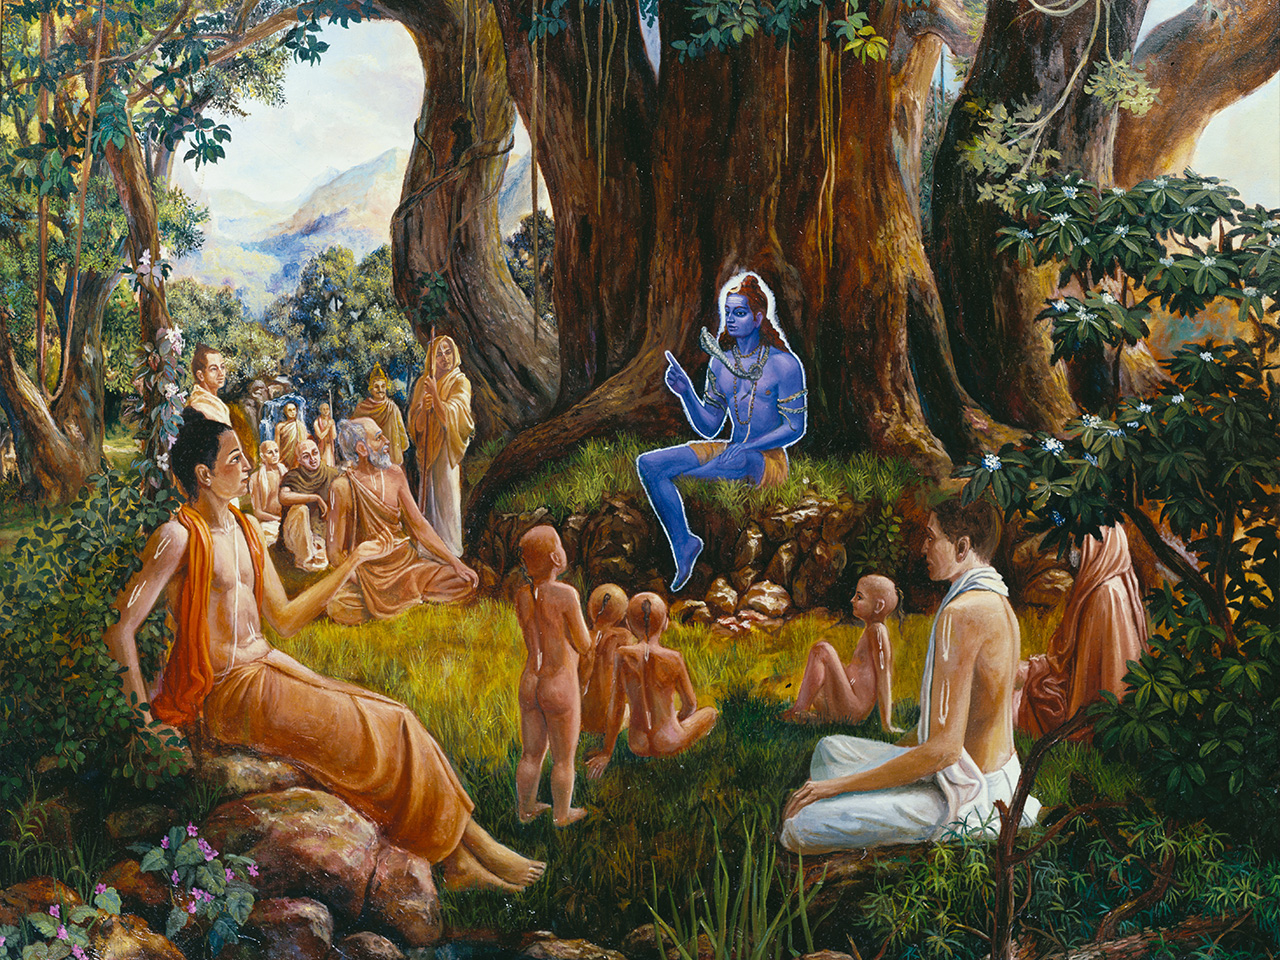 Shad-darshanas: The Six Systems of Vedic Philosophy